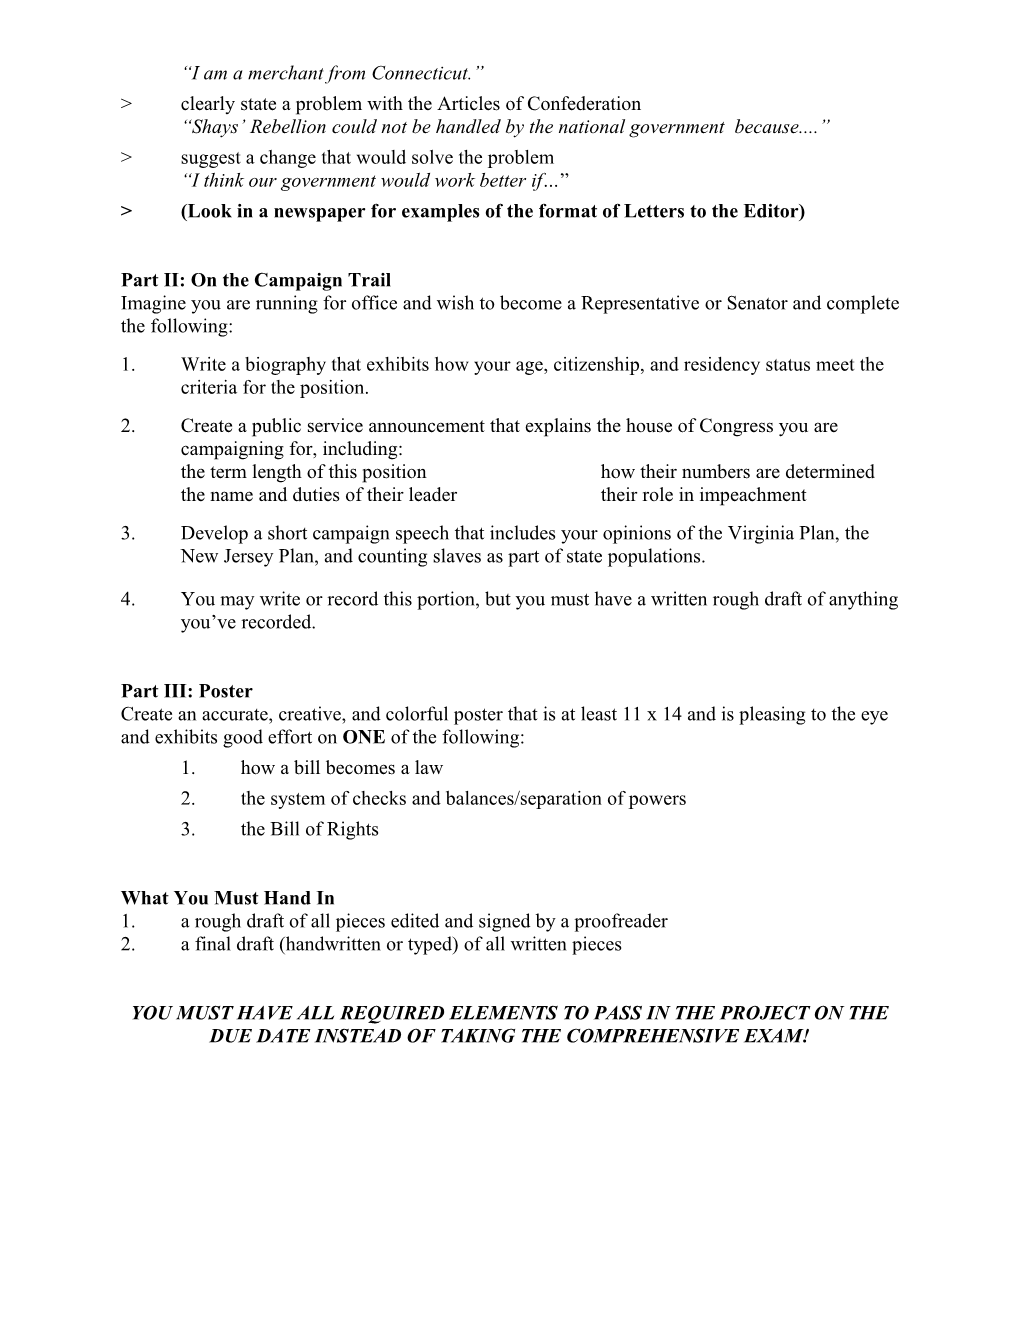 Articles of Confederation, Constitution, Bill of Rights Study Guide